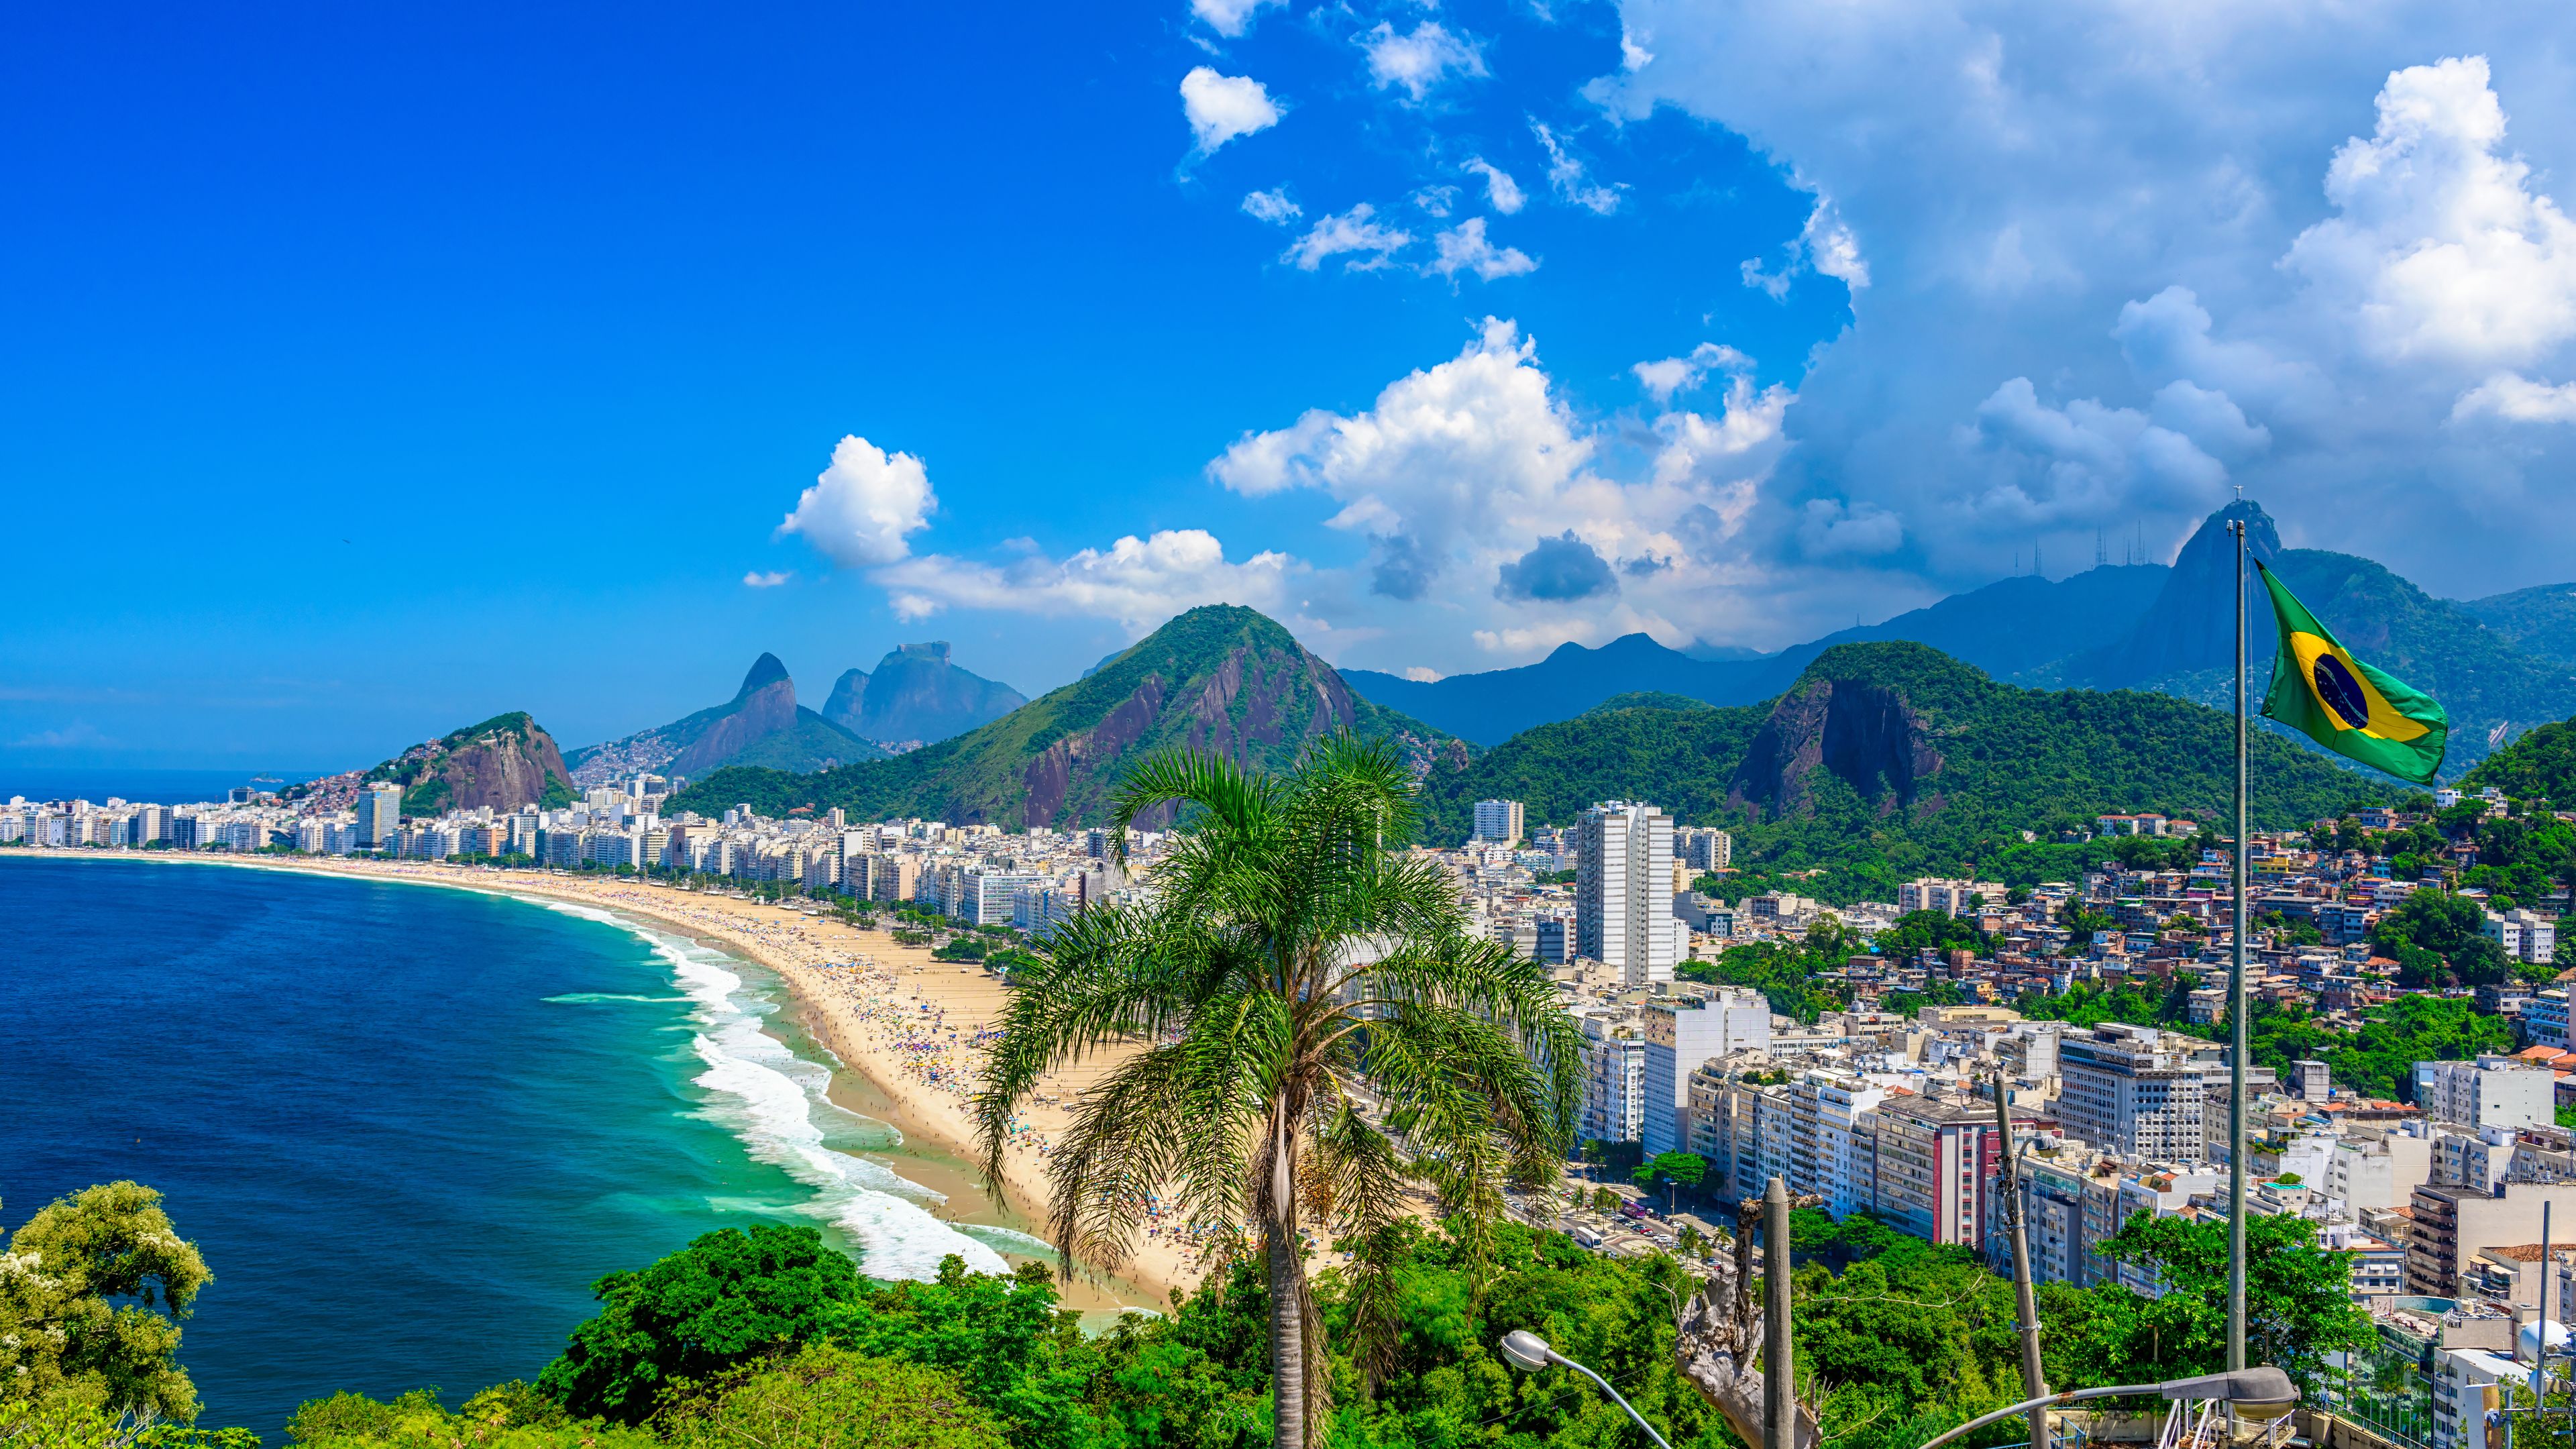 travel to brazil from united states